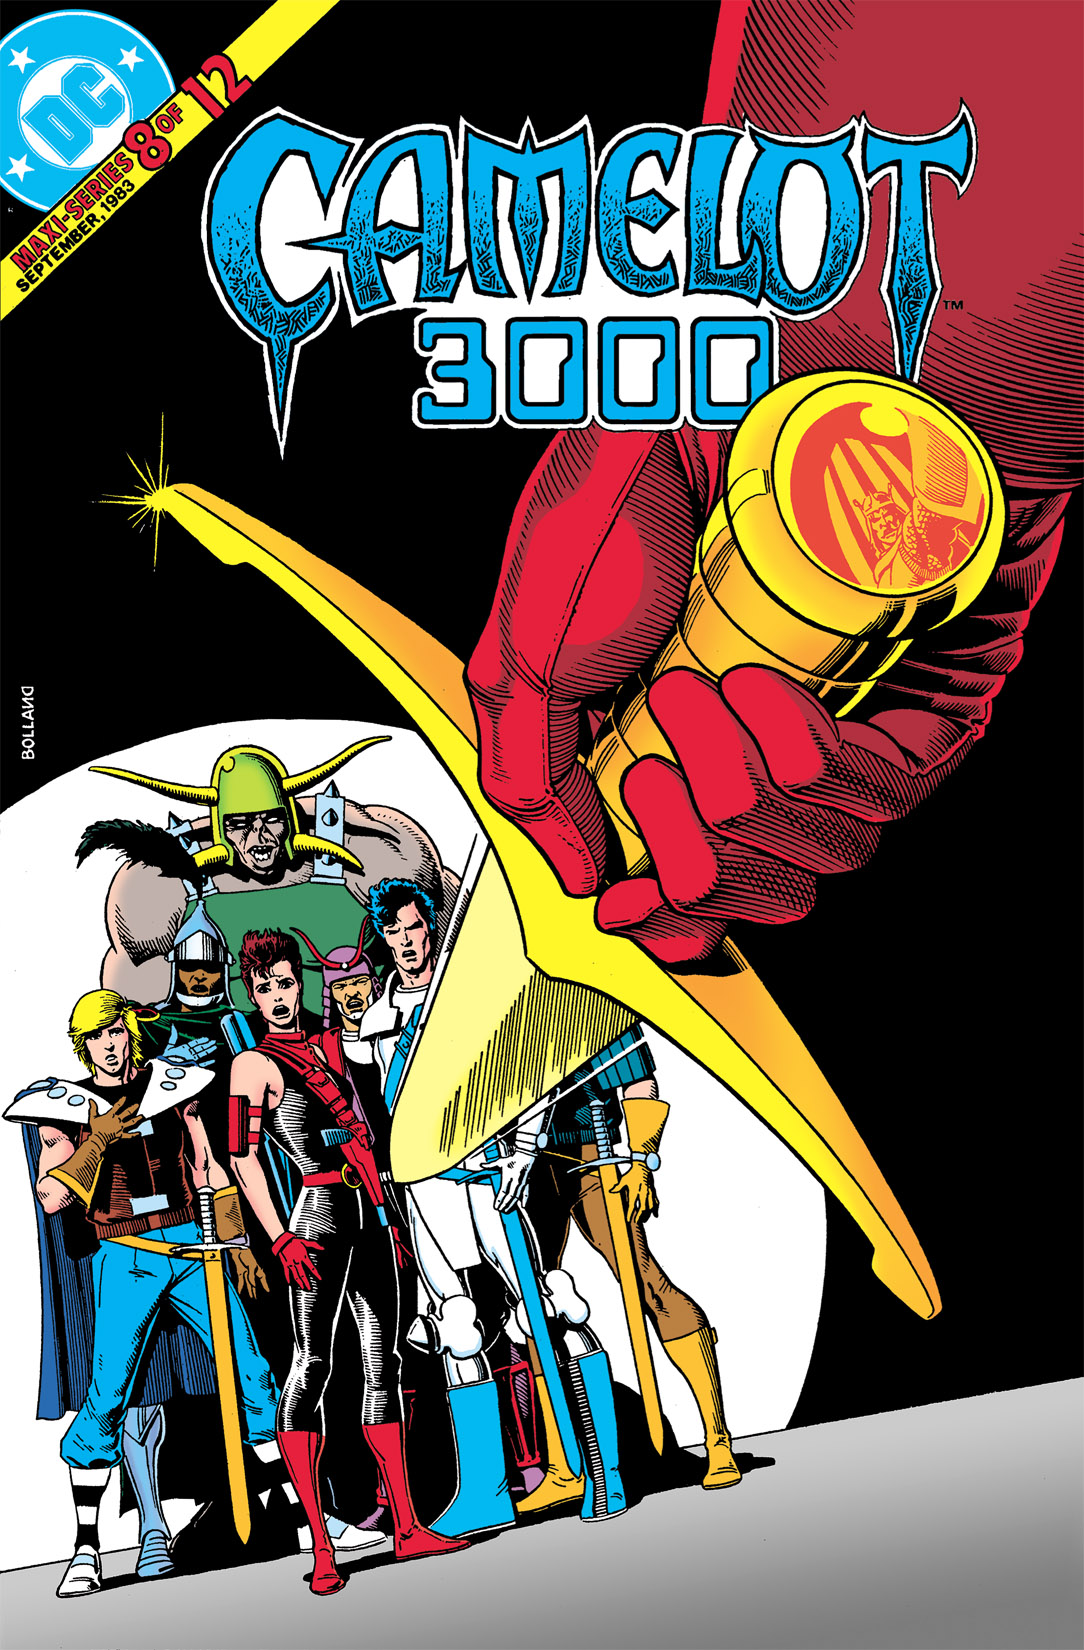 Read online Camelot 3000 comic -  Issue #8 - 1